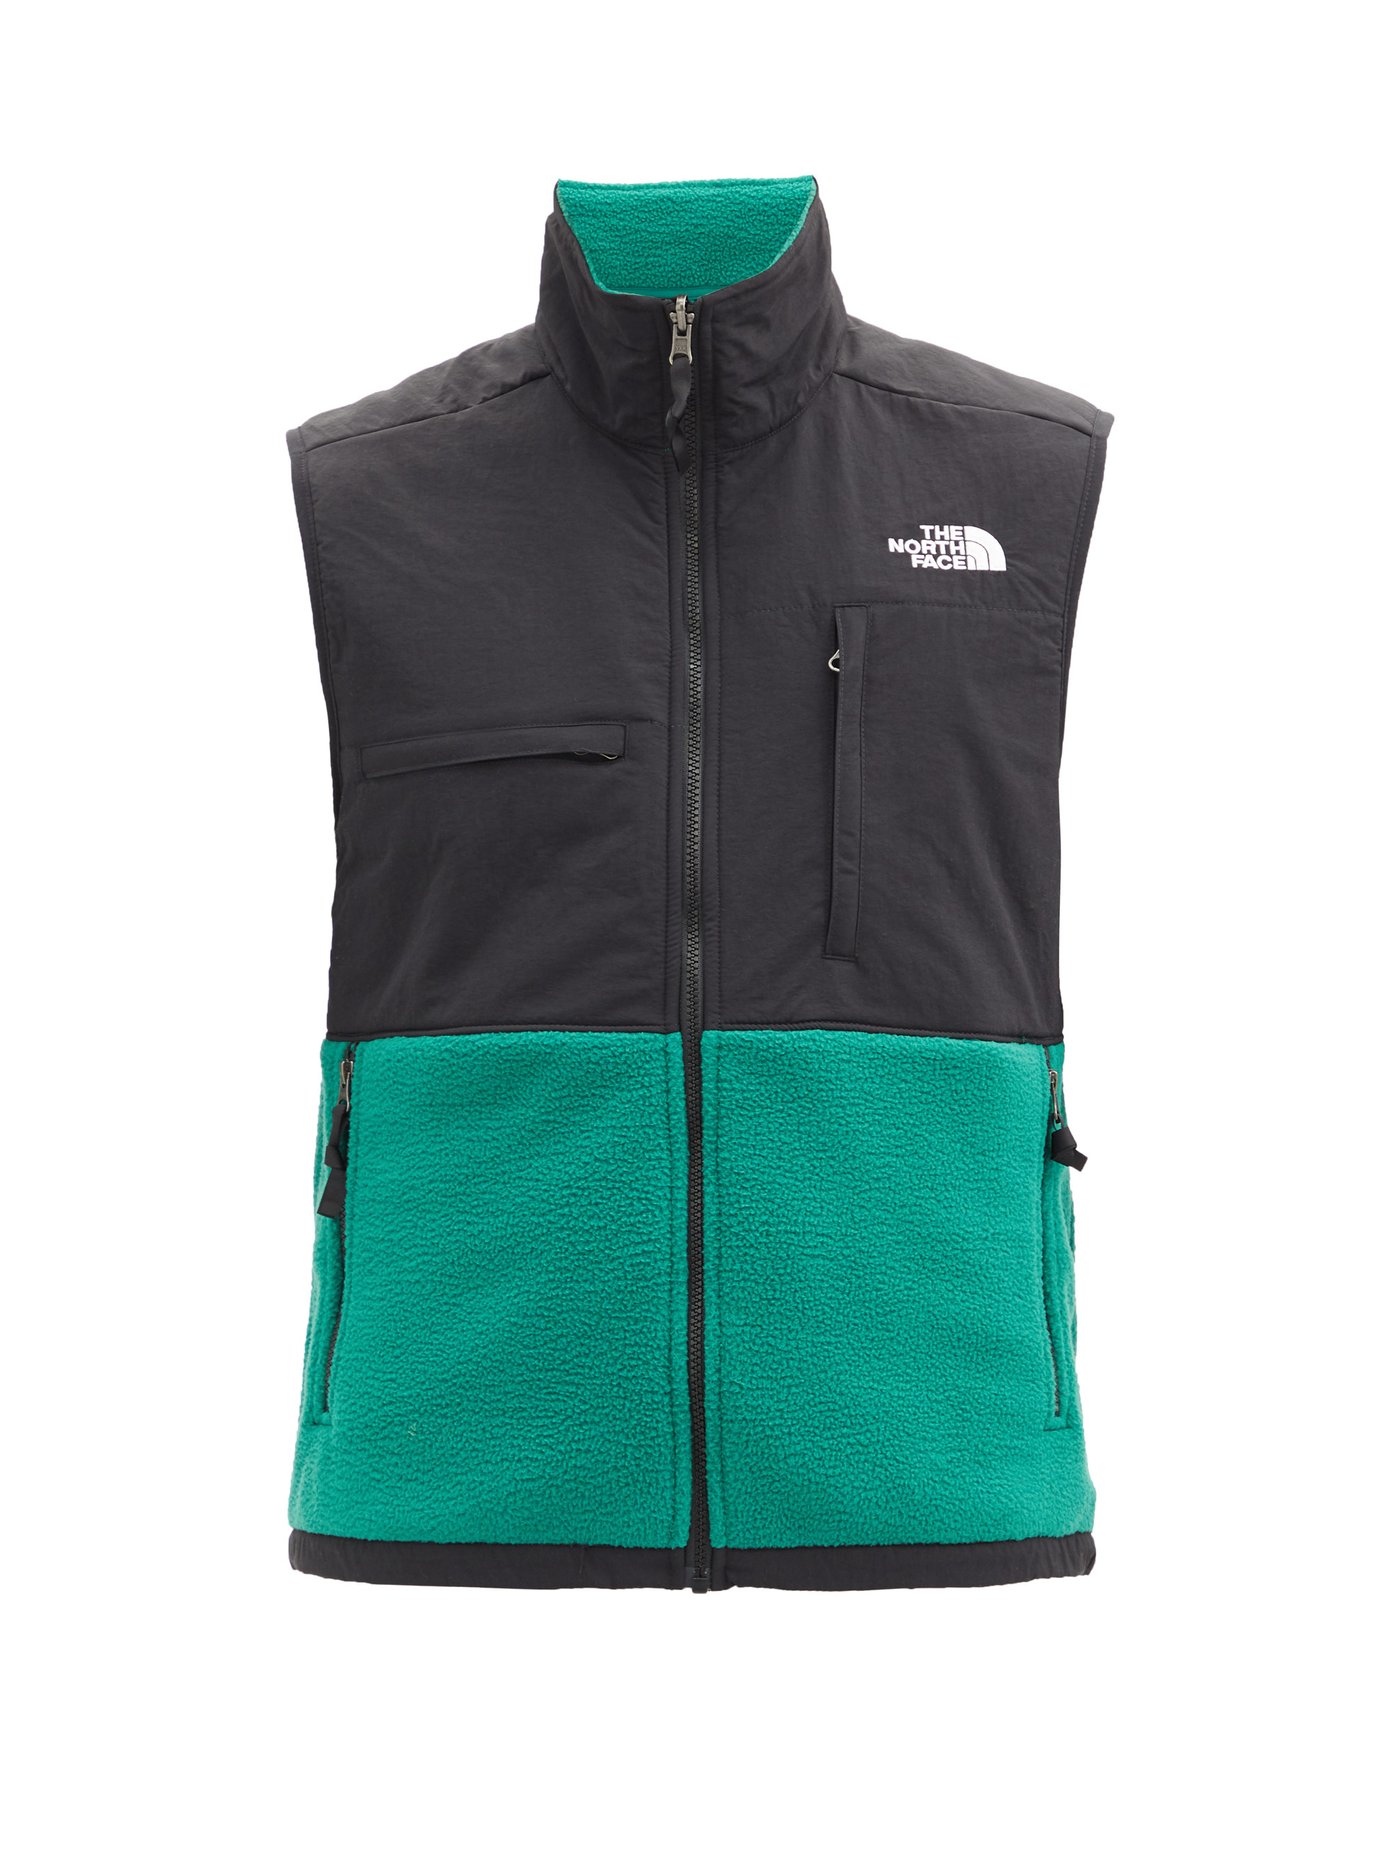 north face gilet uk